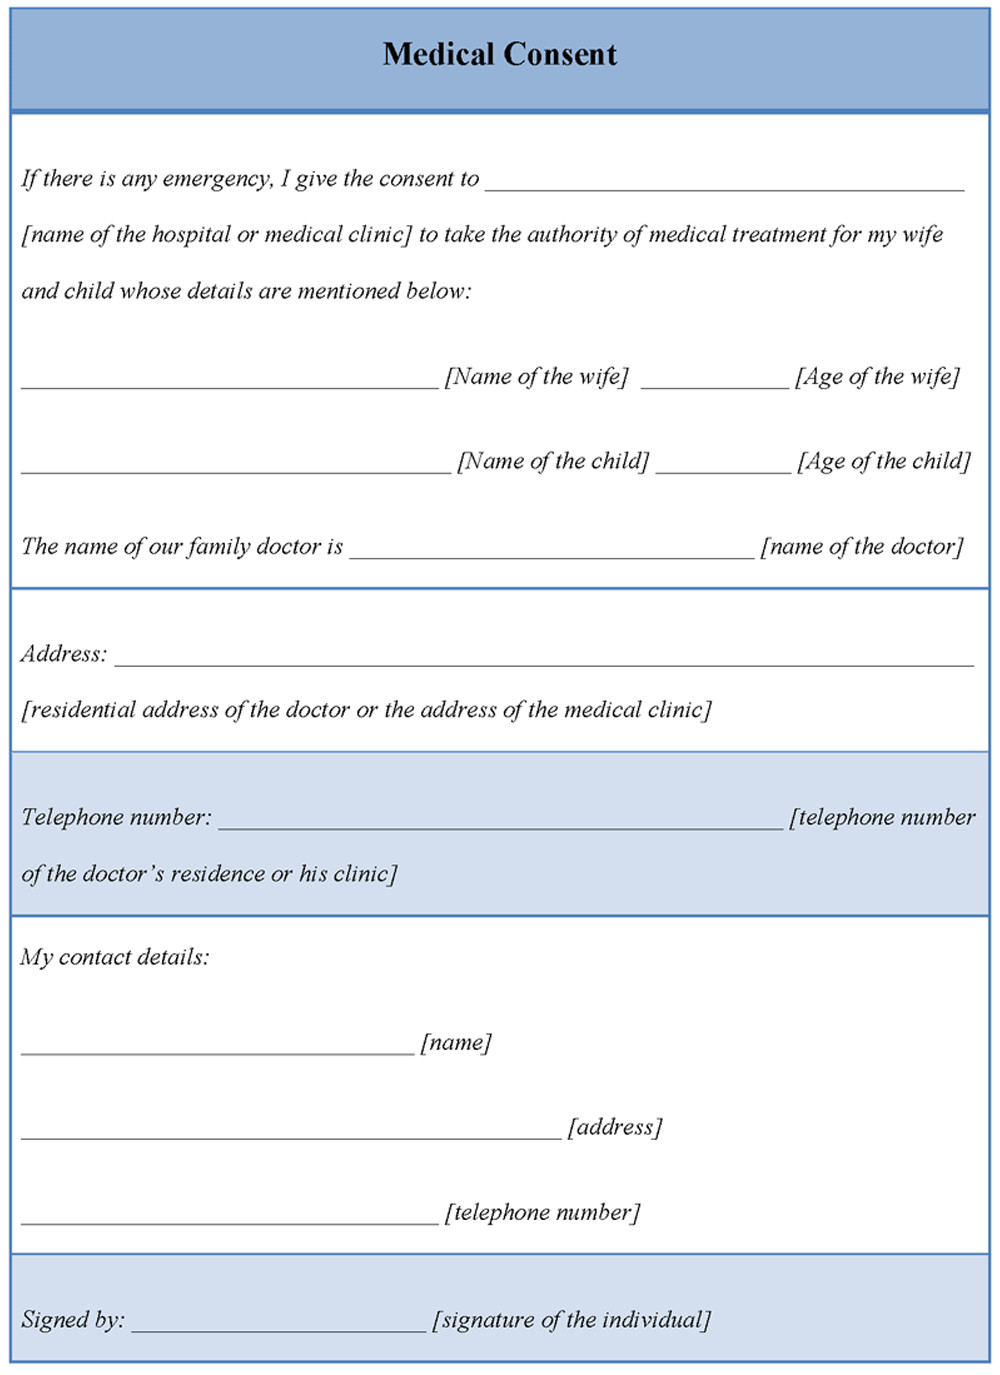 Medical Consent form Template Medical Template for Consent form Example Of Medical